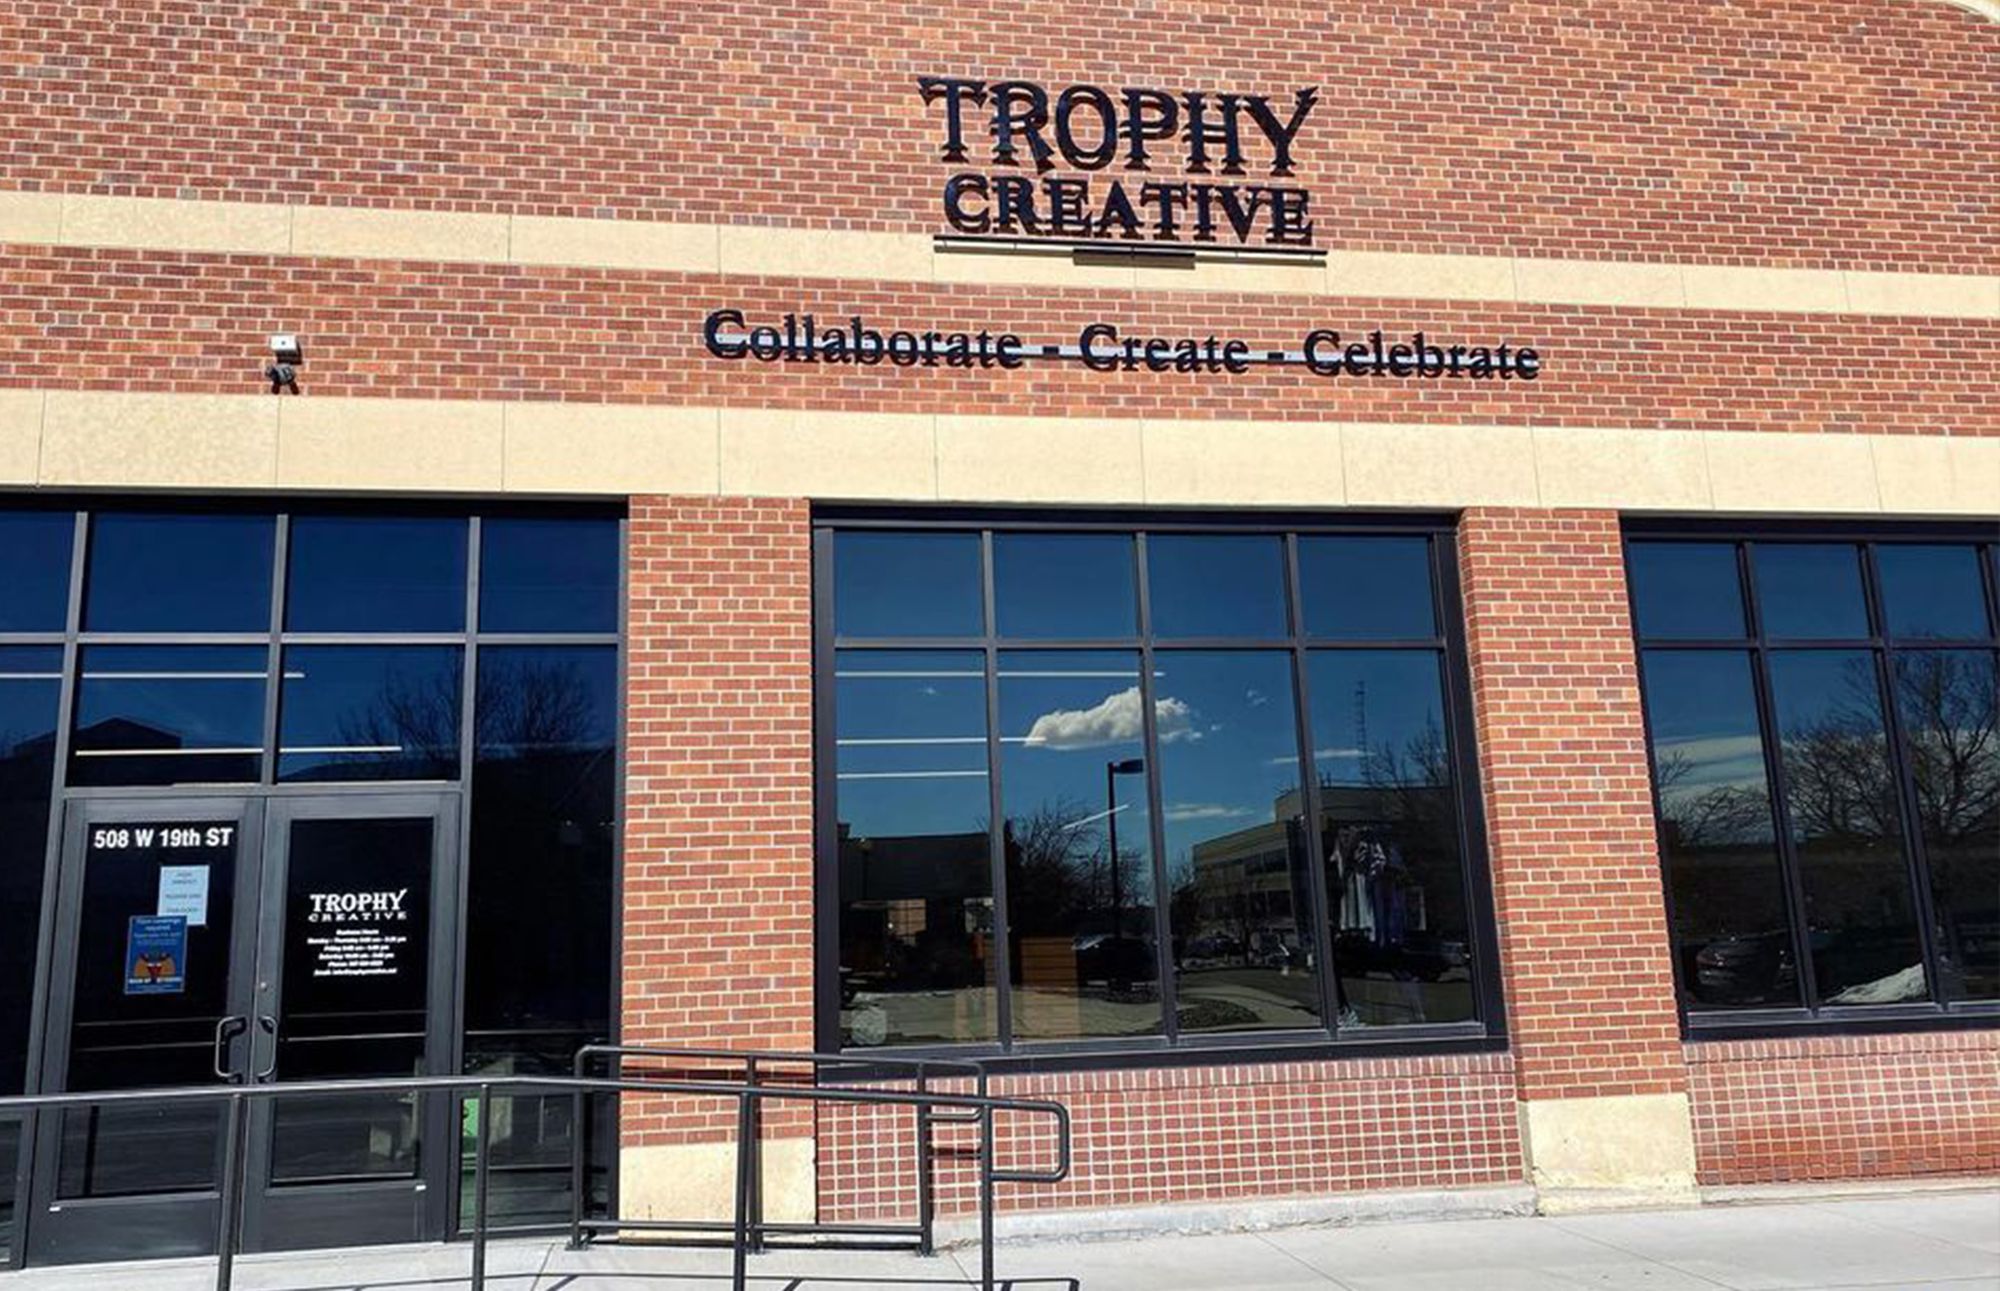 Take A Look At Trophy Creative's New Location